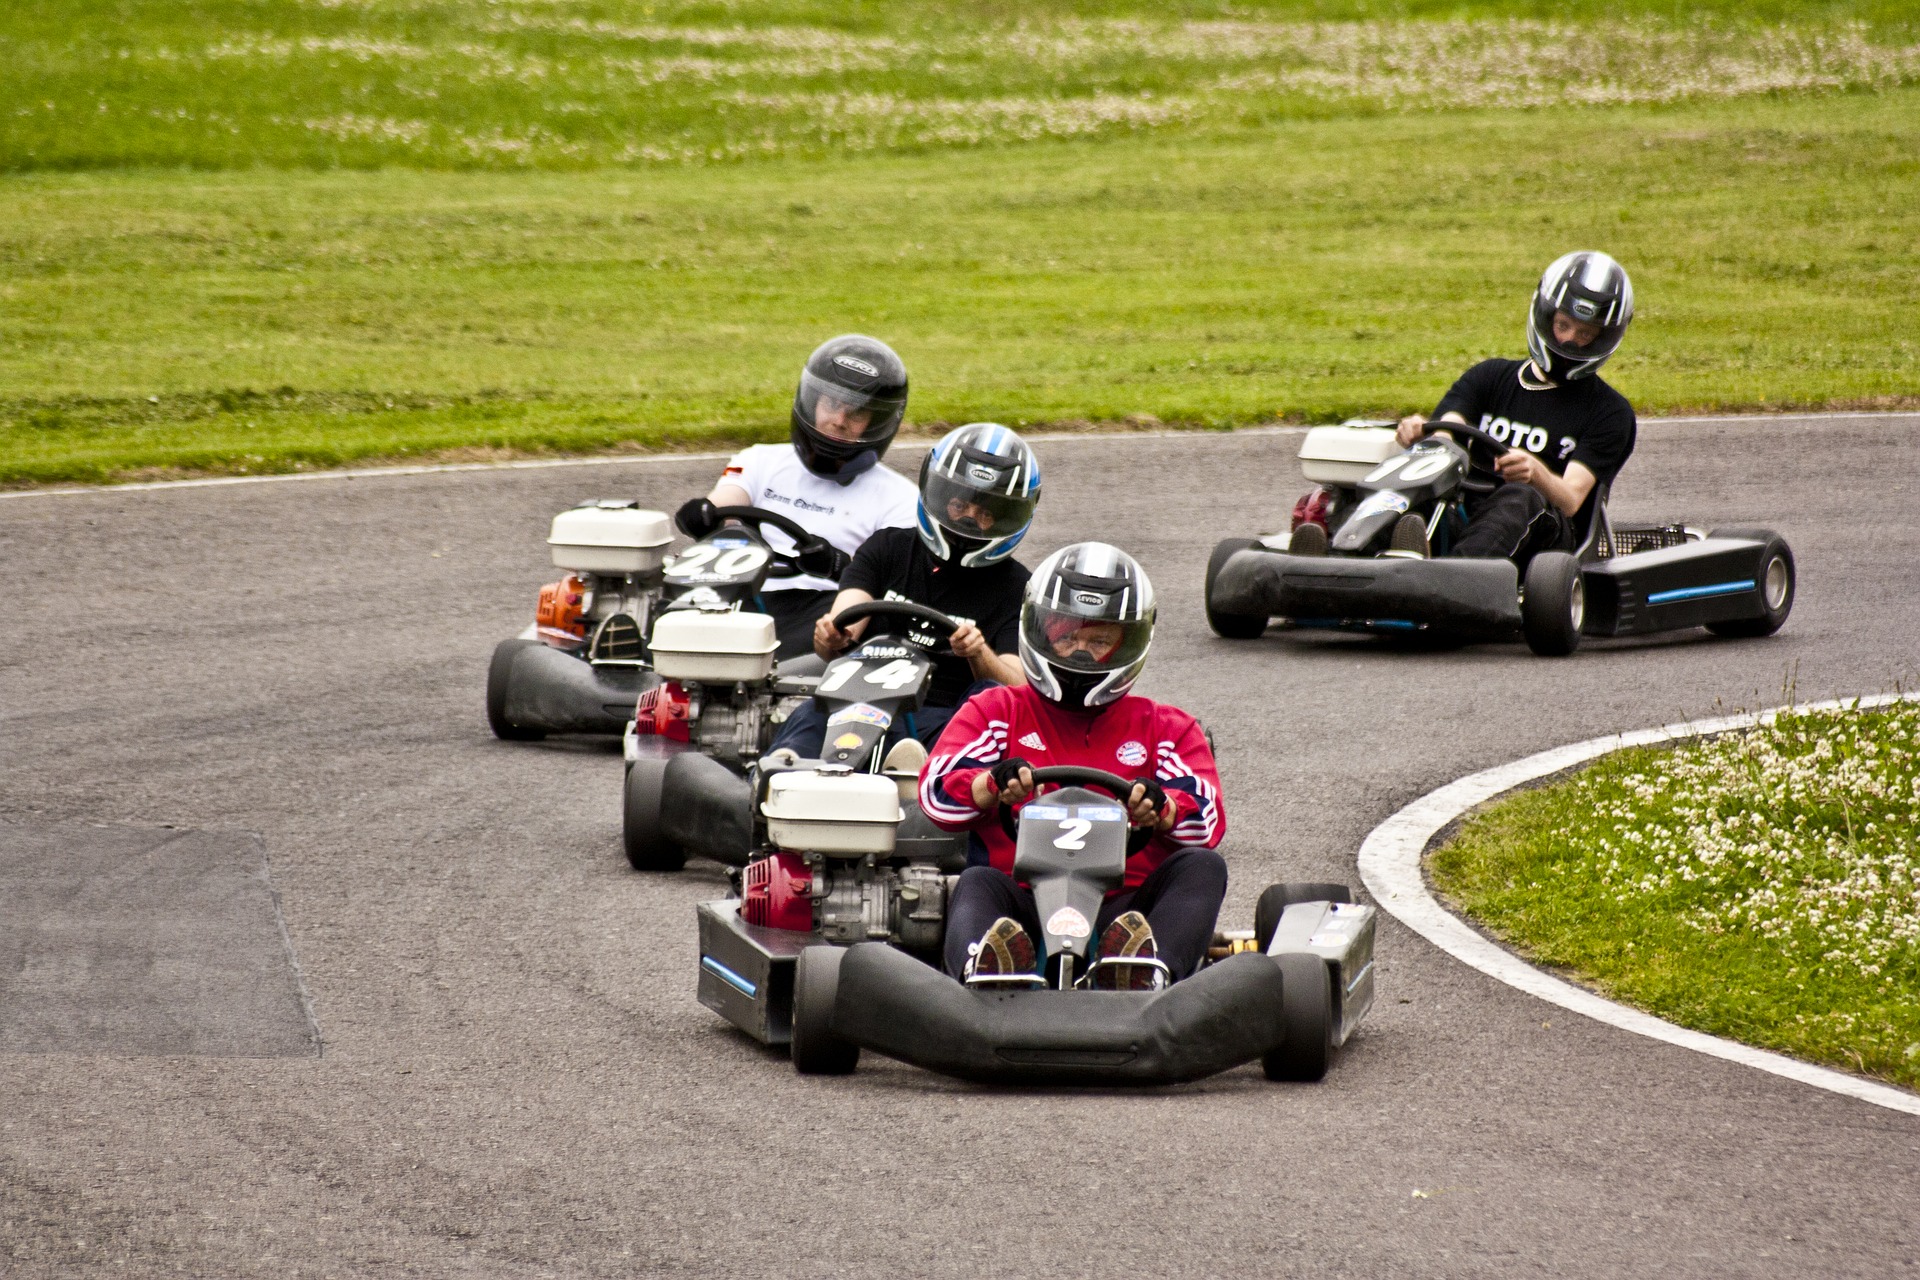 Racing Go Karts and drivers competing to win the race